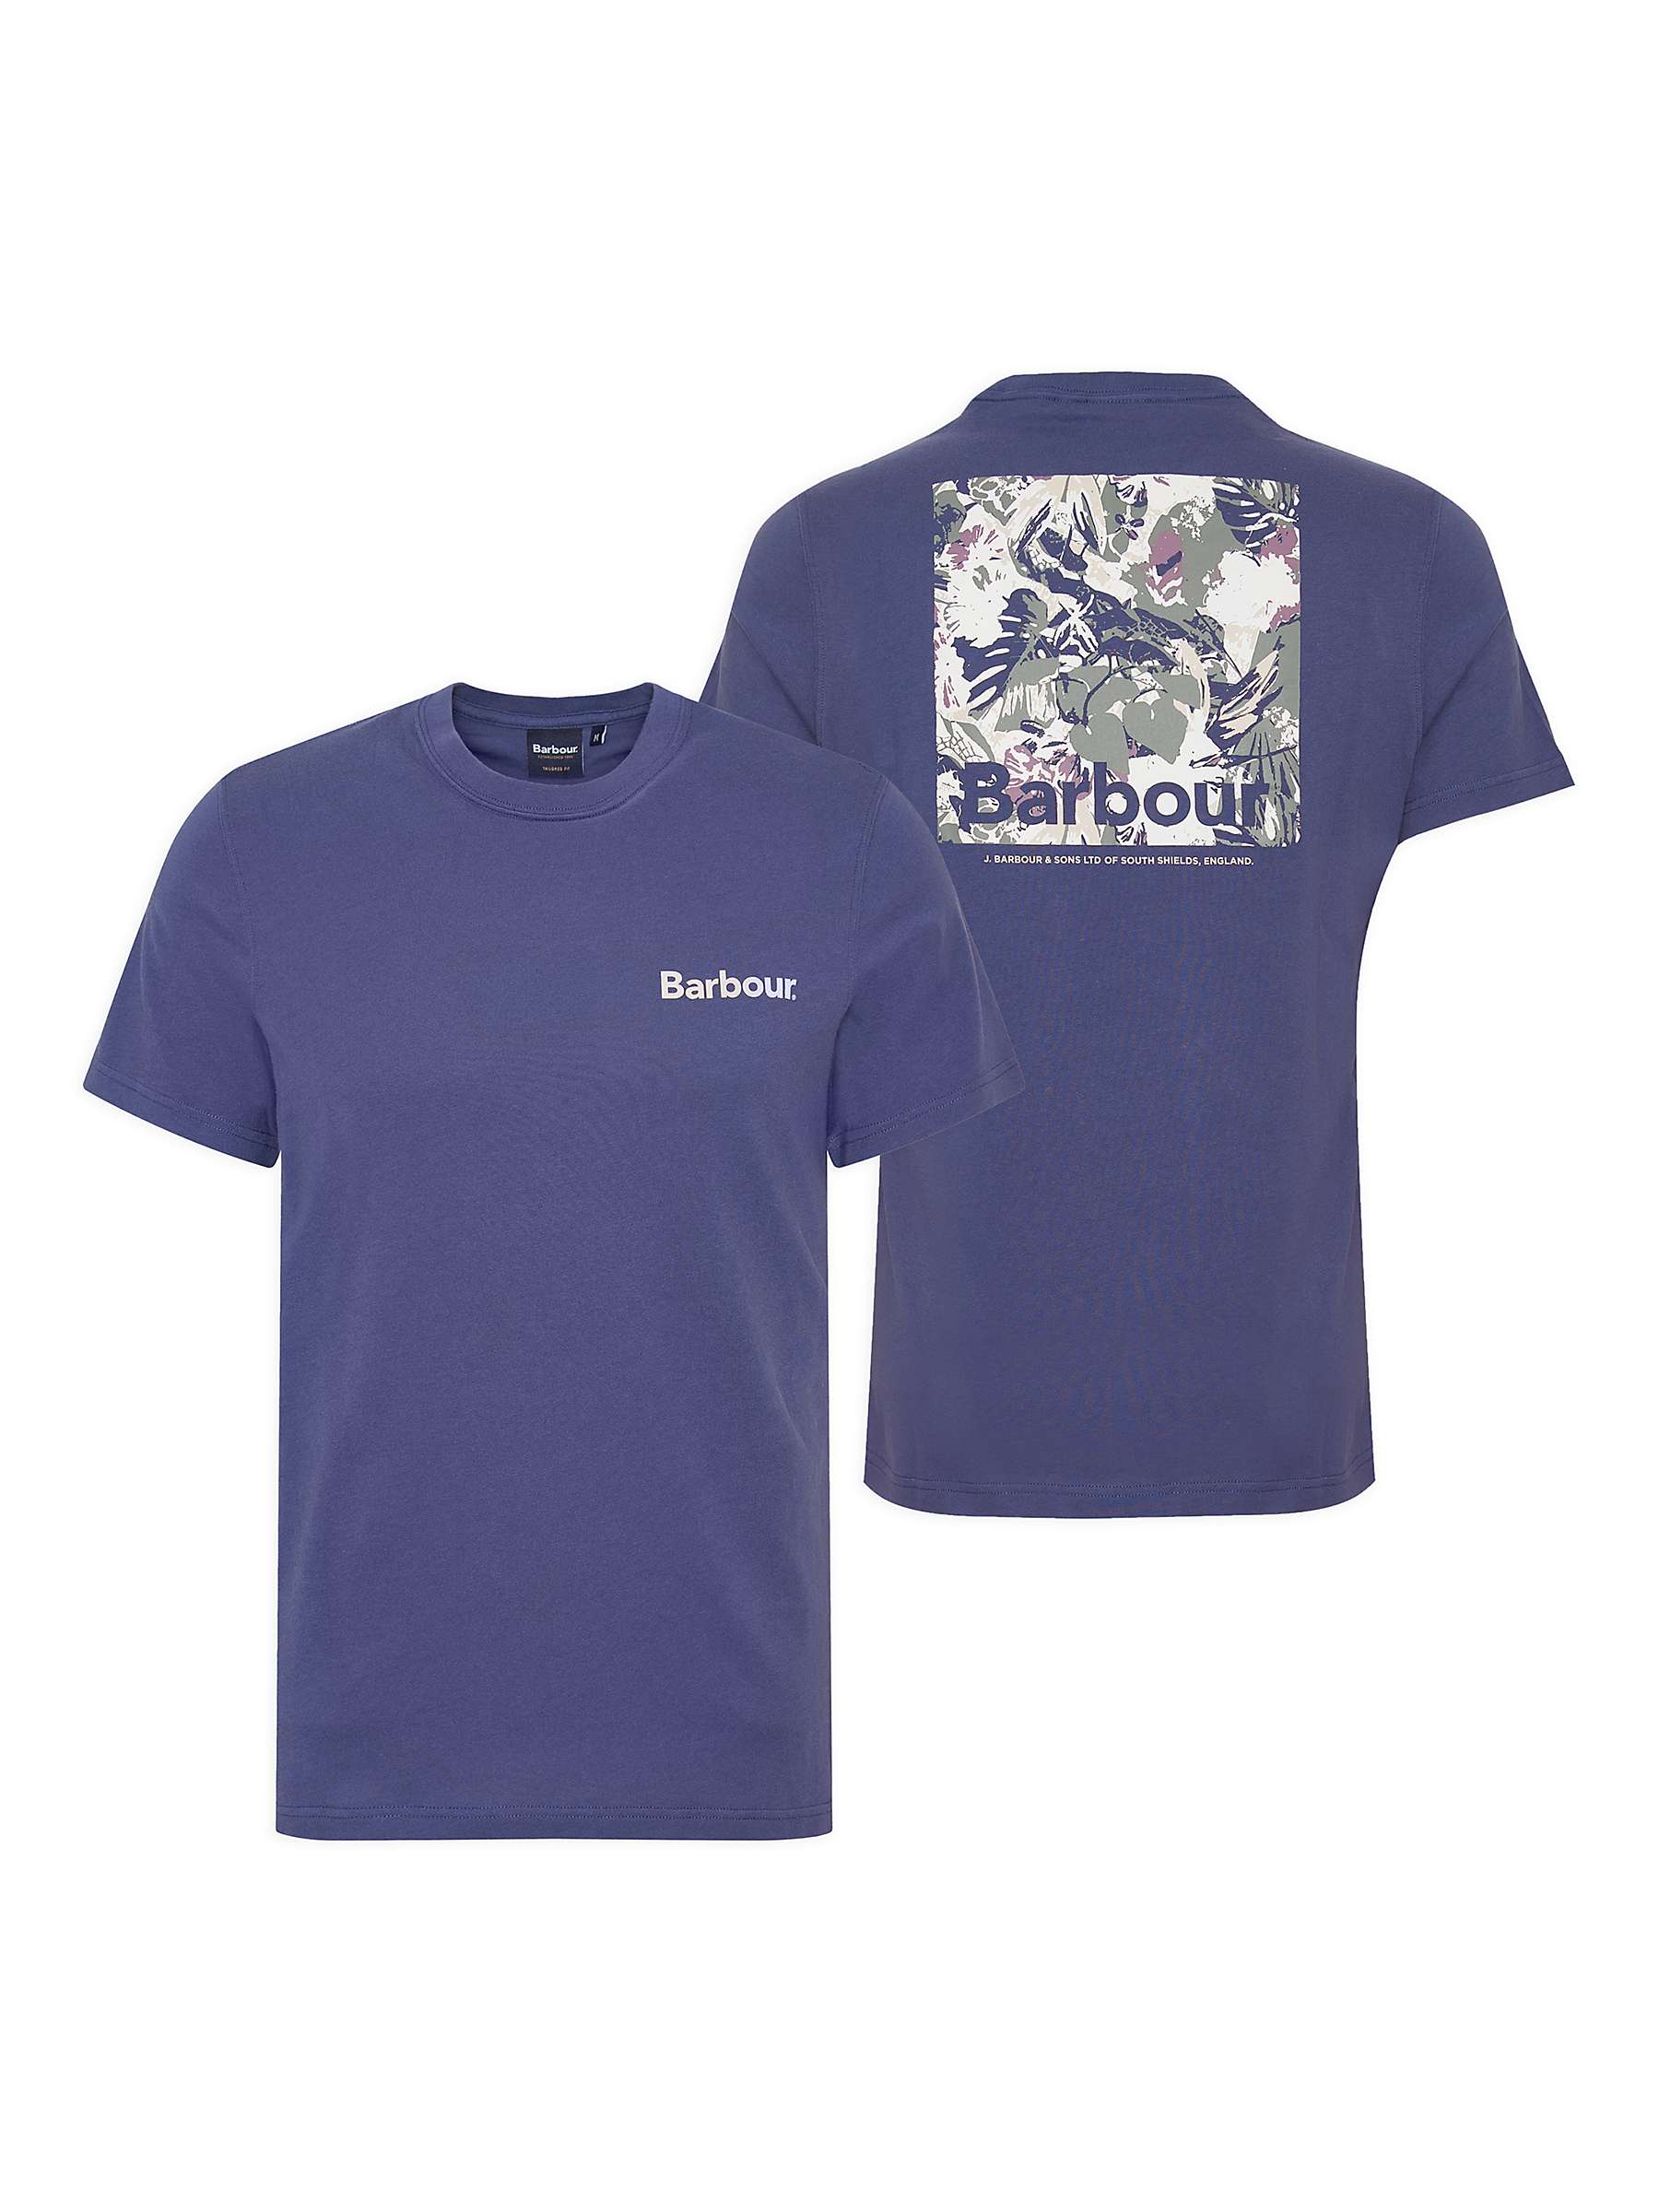 Buy Barbour Hindle Graphic T-Shirt, Oceana Online at johnlewis.com